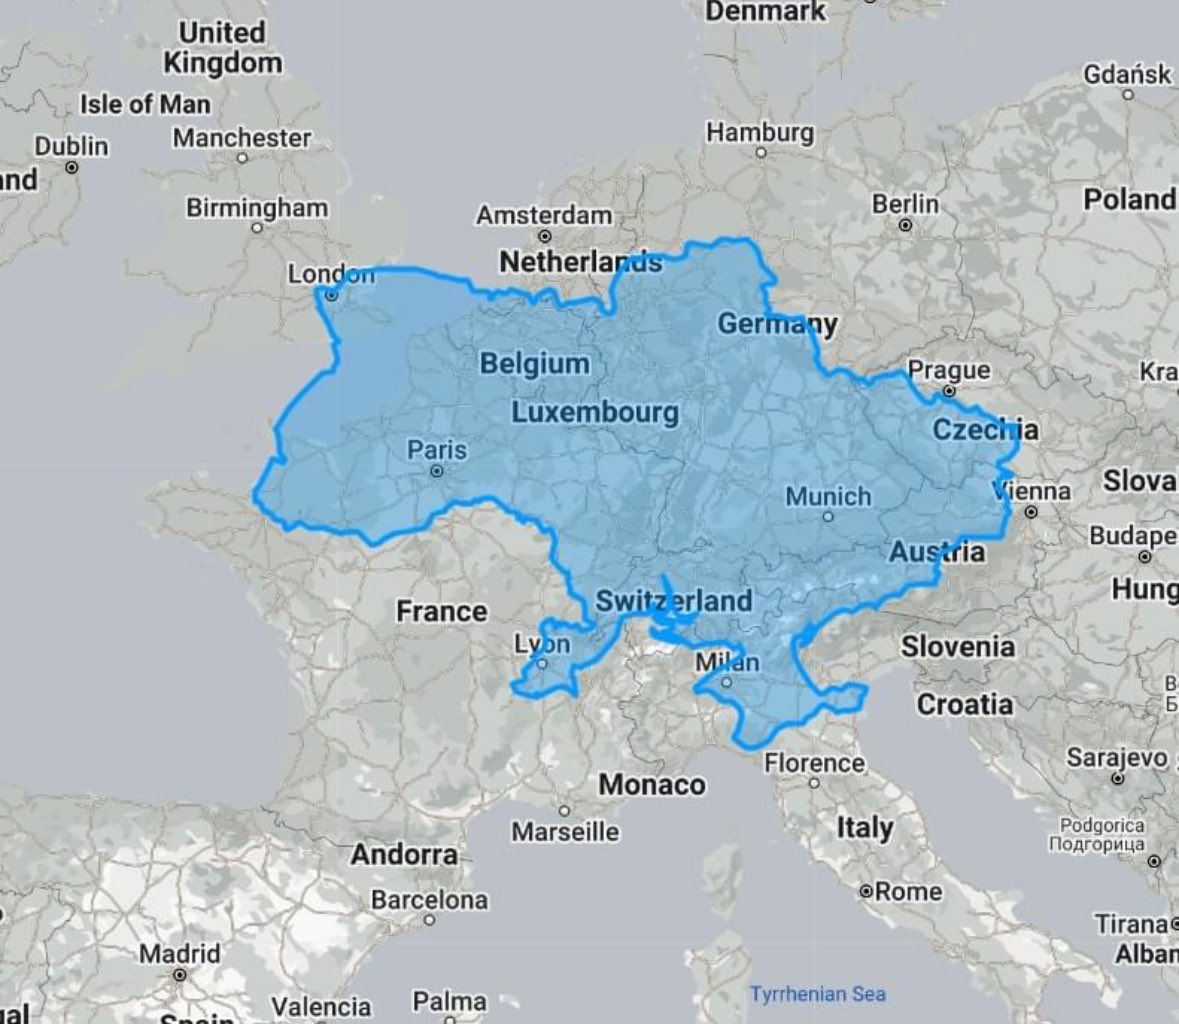 size of Ukraine compared to Western Europe. Ukraine is holding that frontline for over two years. Fcking help them with everything you got